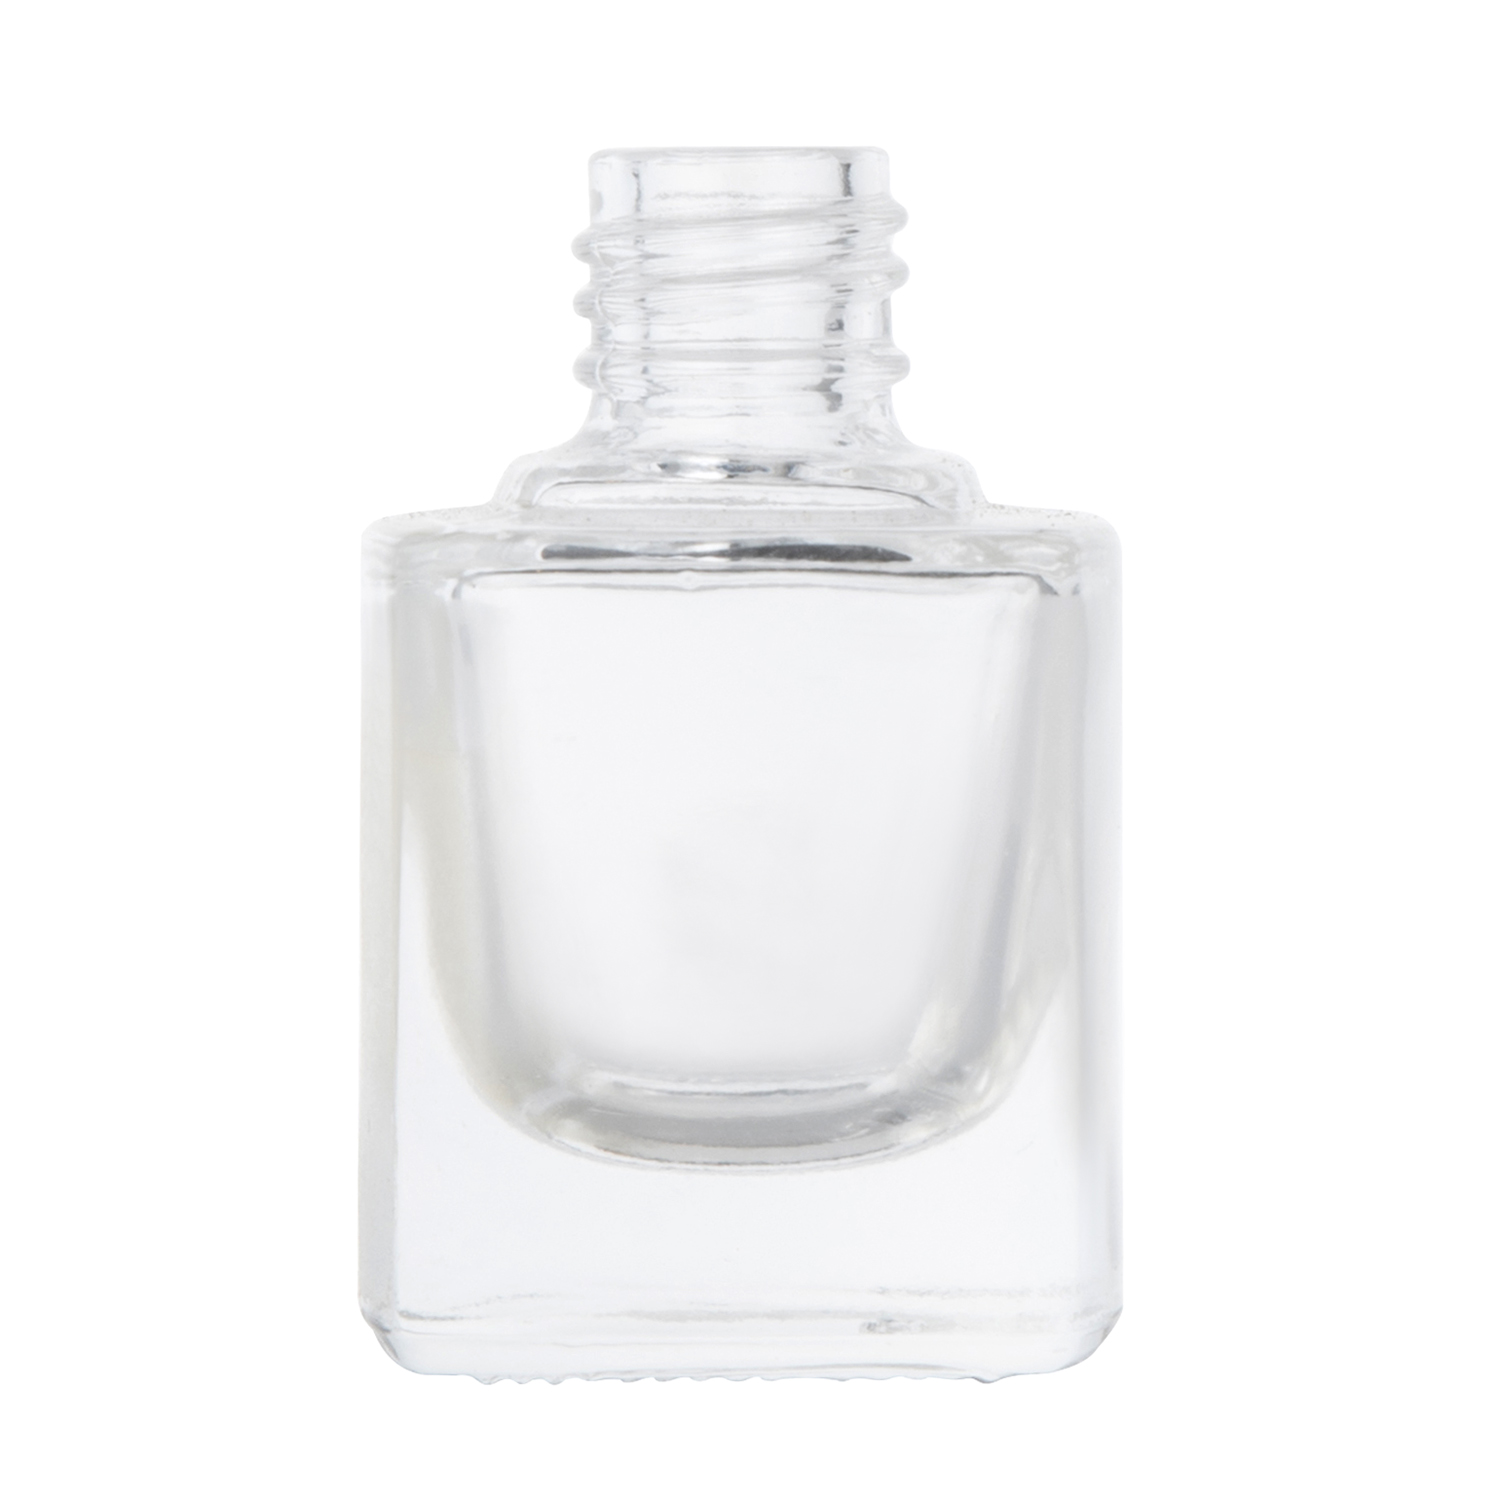 12ml Empty Square Glass Nail Polish Bottles with Black Cap And High Quality Dopont Brush